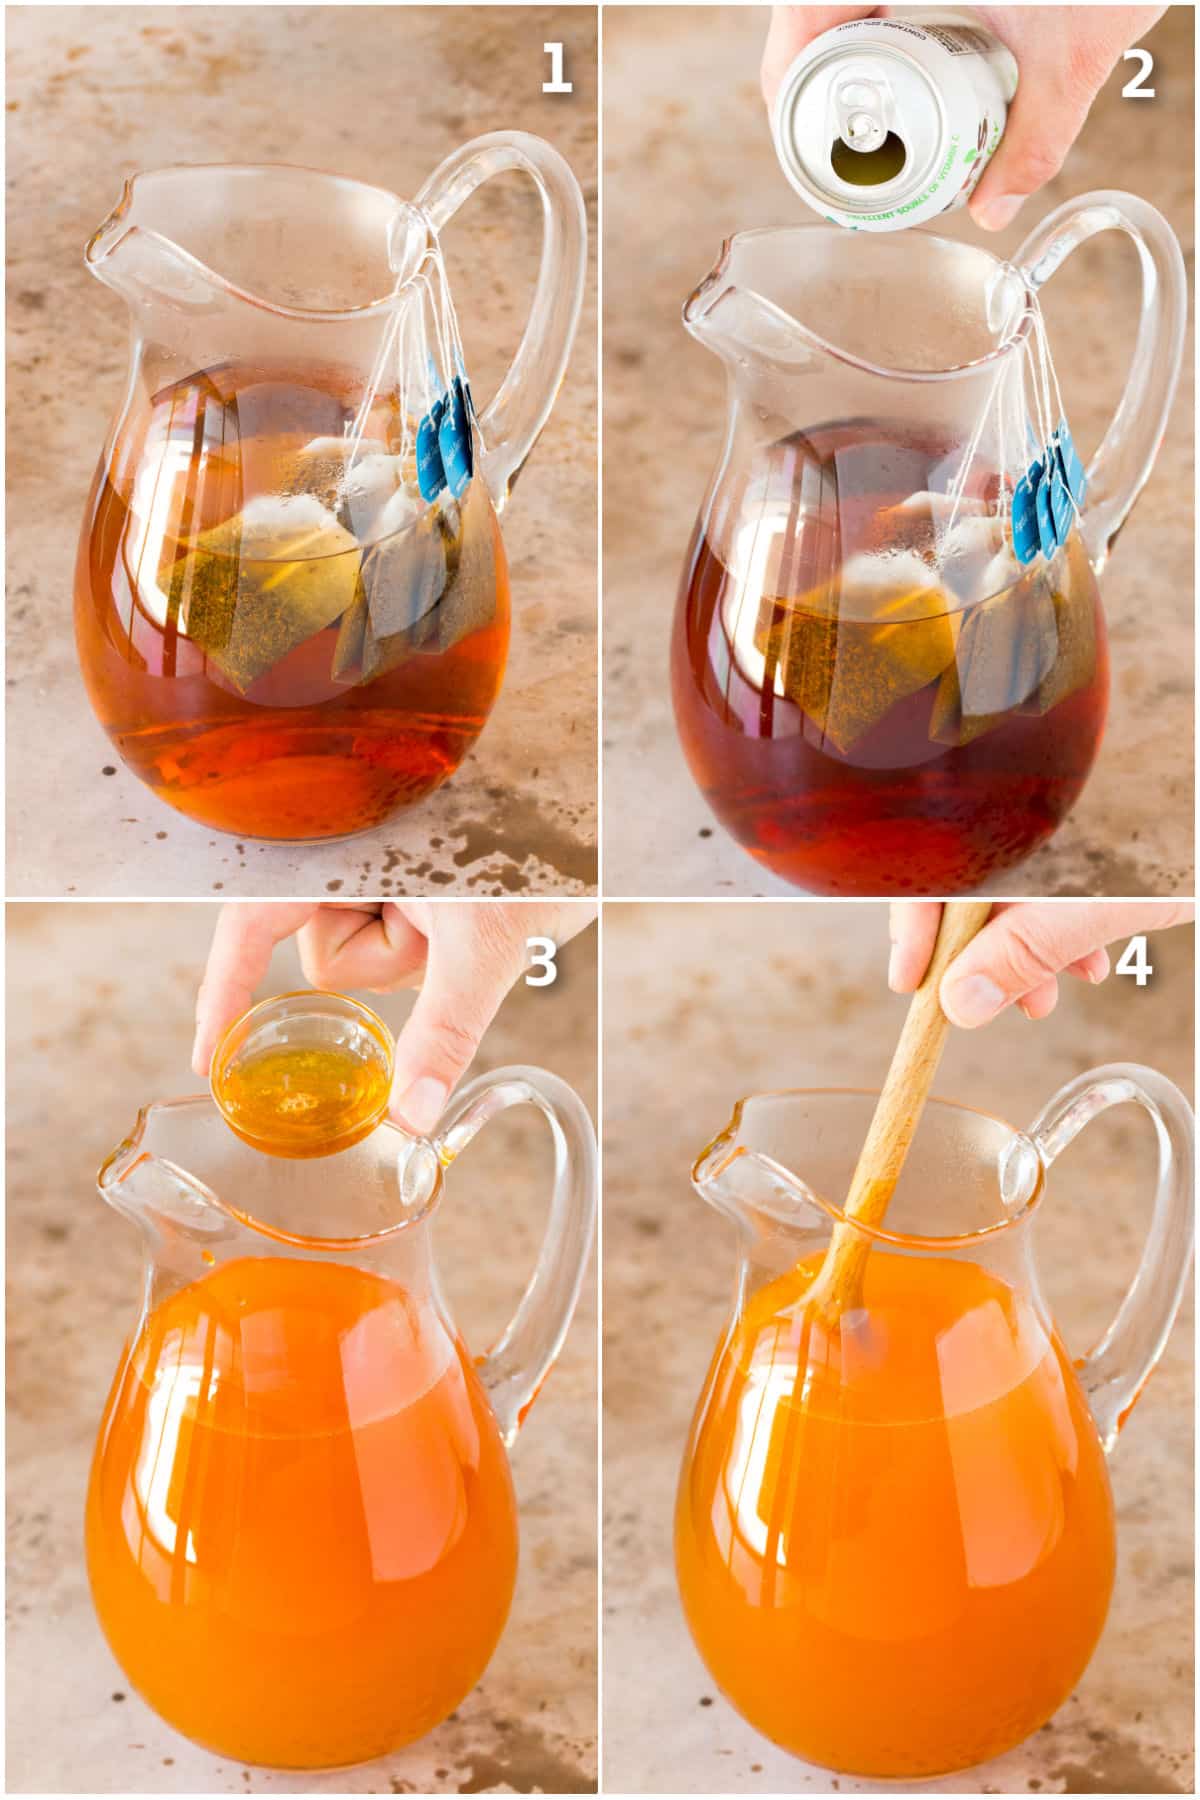 Step by step process shots showing how to make mango iced tea.